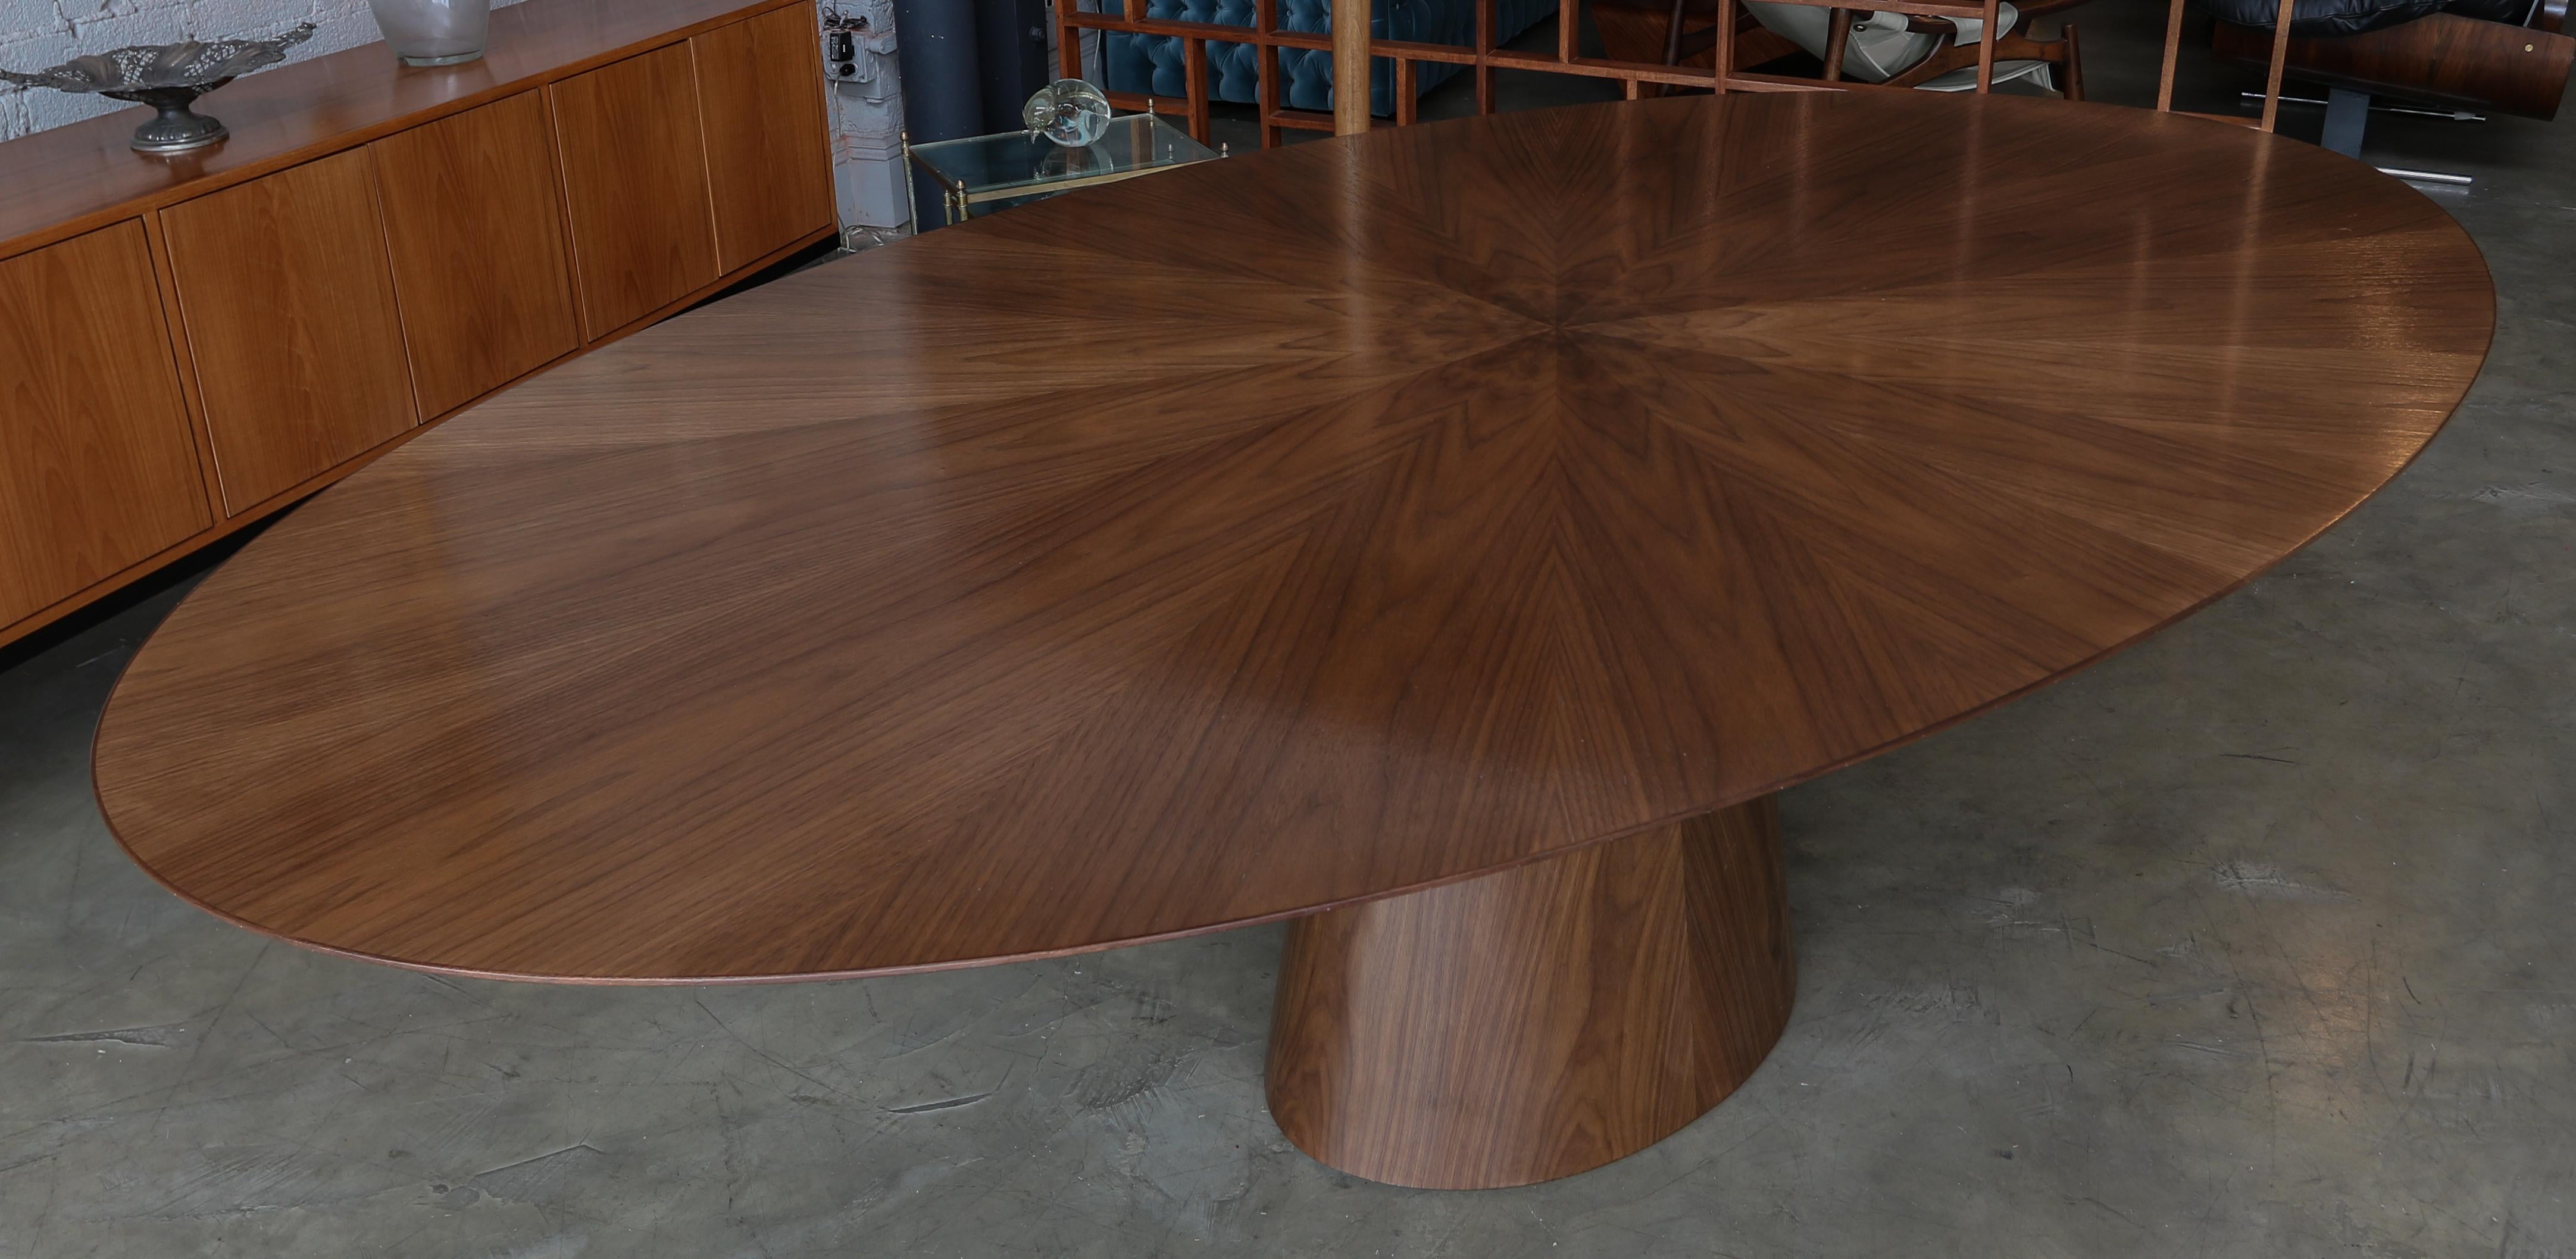 American Custom Midcentury Style Walnut Oval Dining Table with Flower Detail by Adesso For Sale